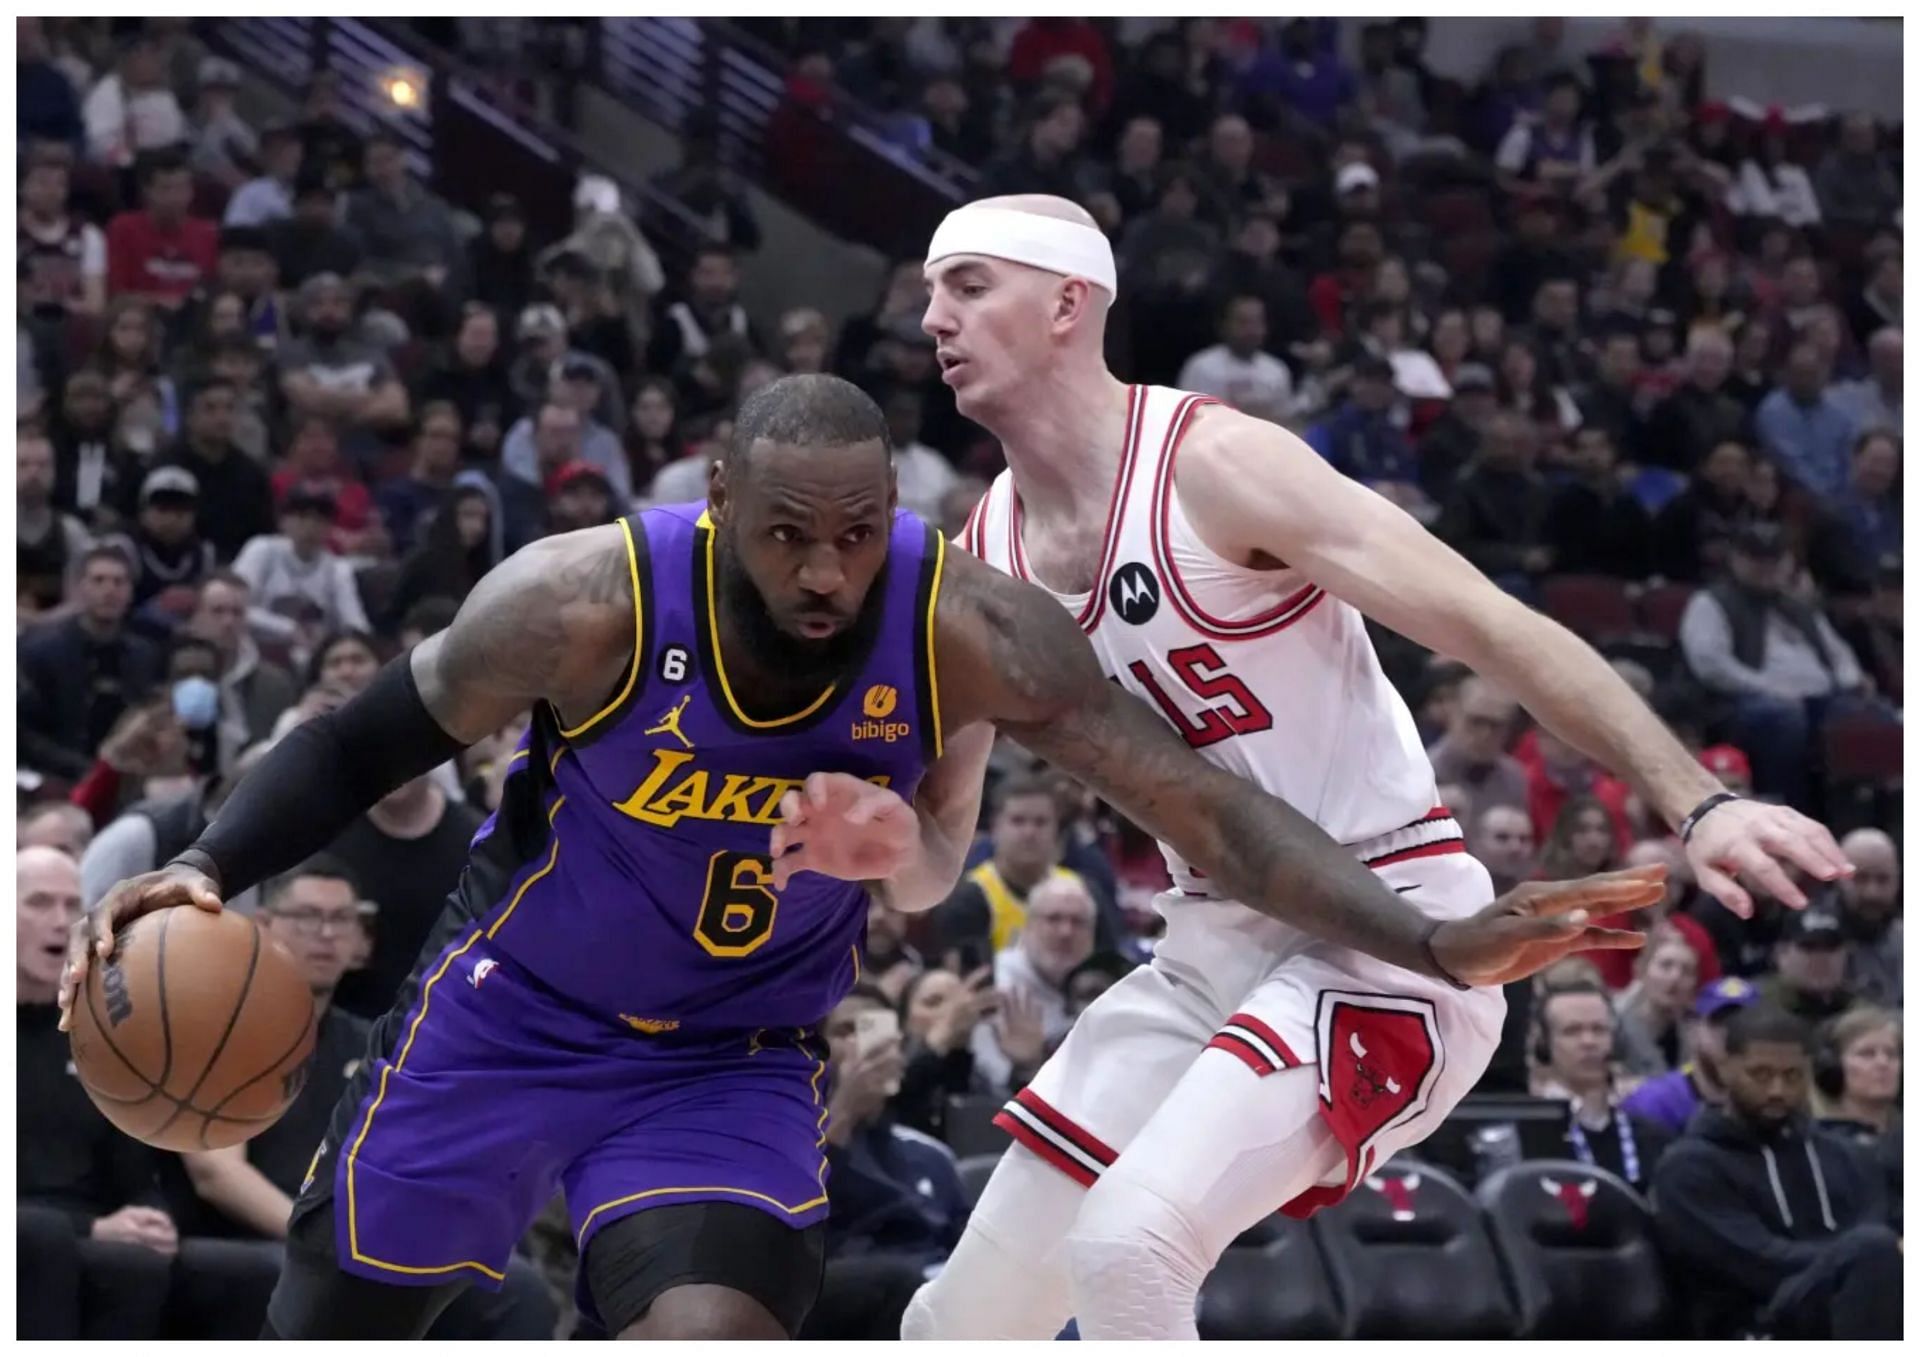 LeBron James and the Lakers will look to snap a two-game losing skid when they face Alex Caruso and the Bulls on Wednesday, December 20 (AP Photo/Charles Rex Arbogast)